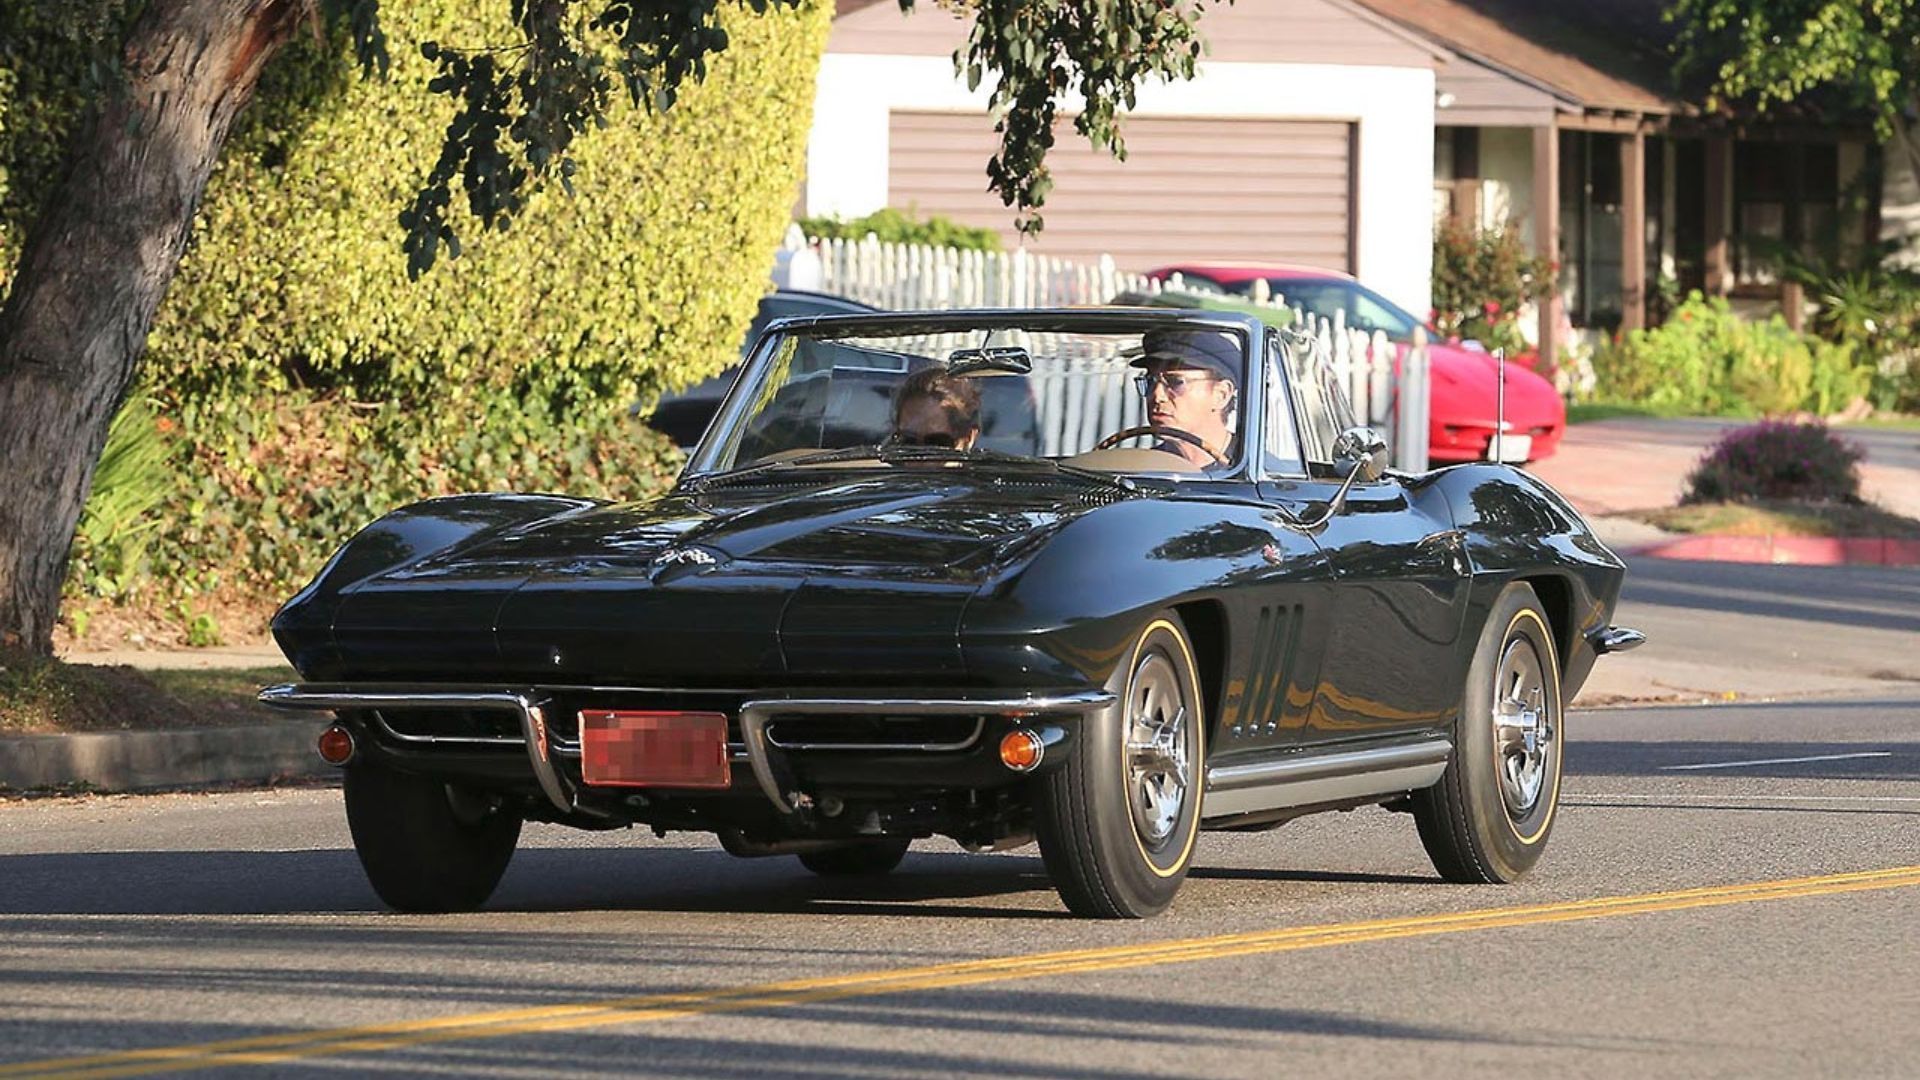 Robert Downey Jr on the road with one of rare classics